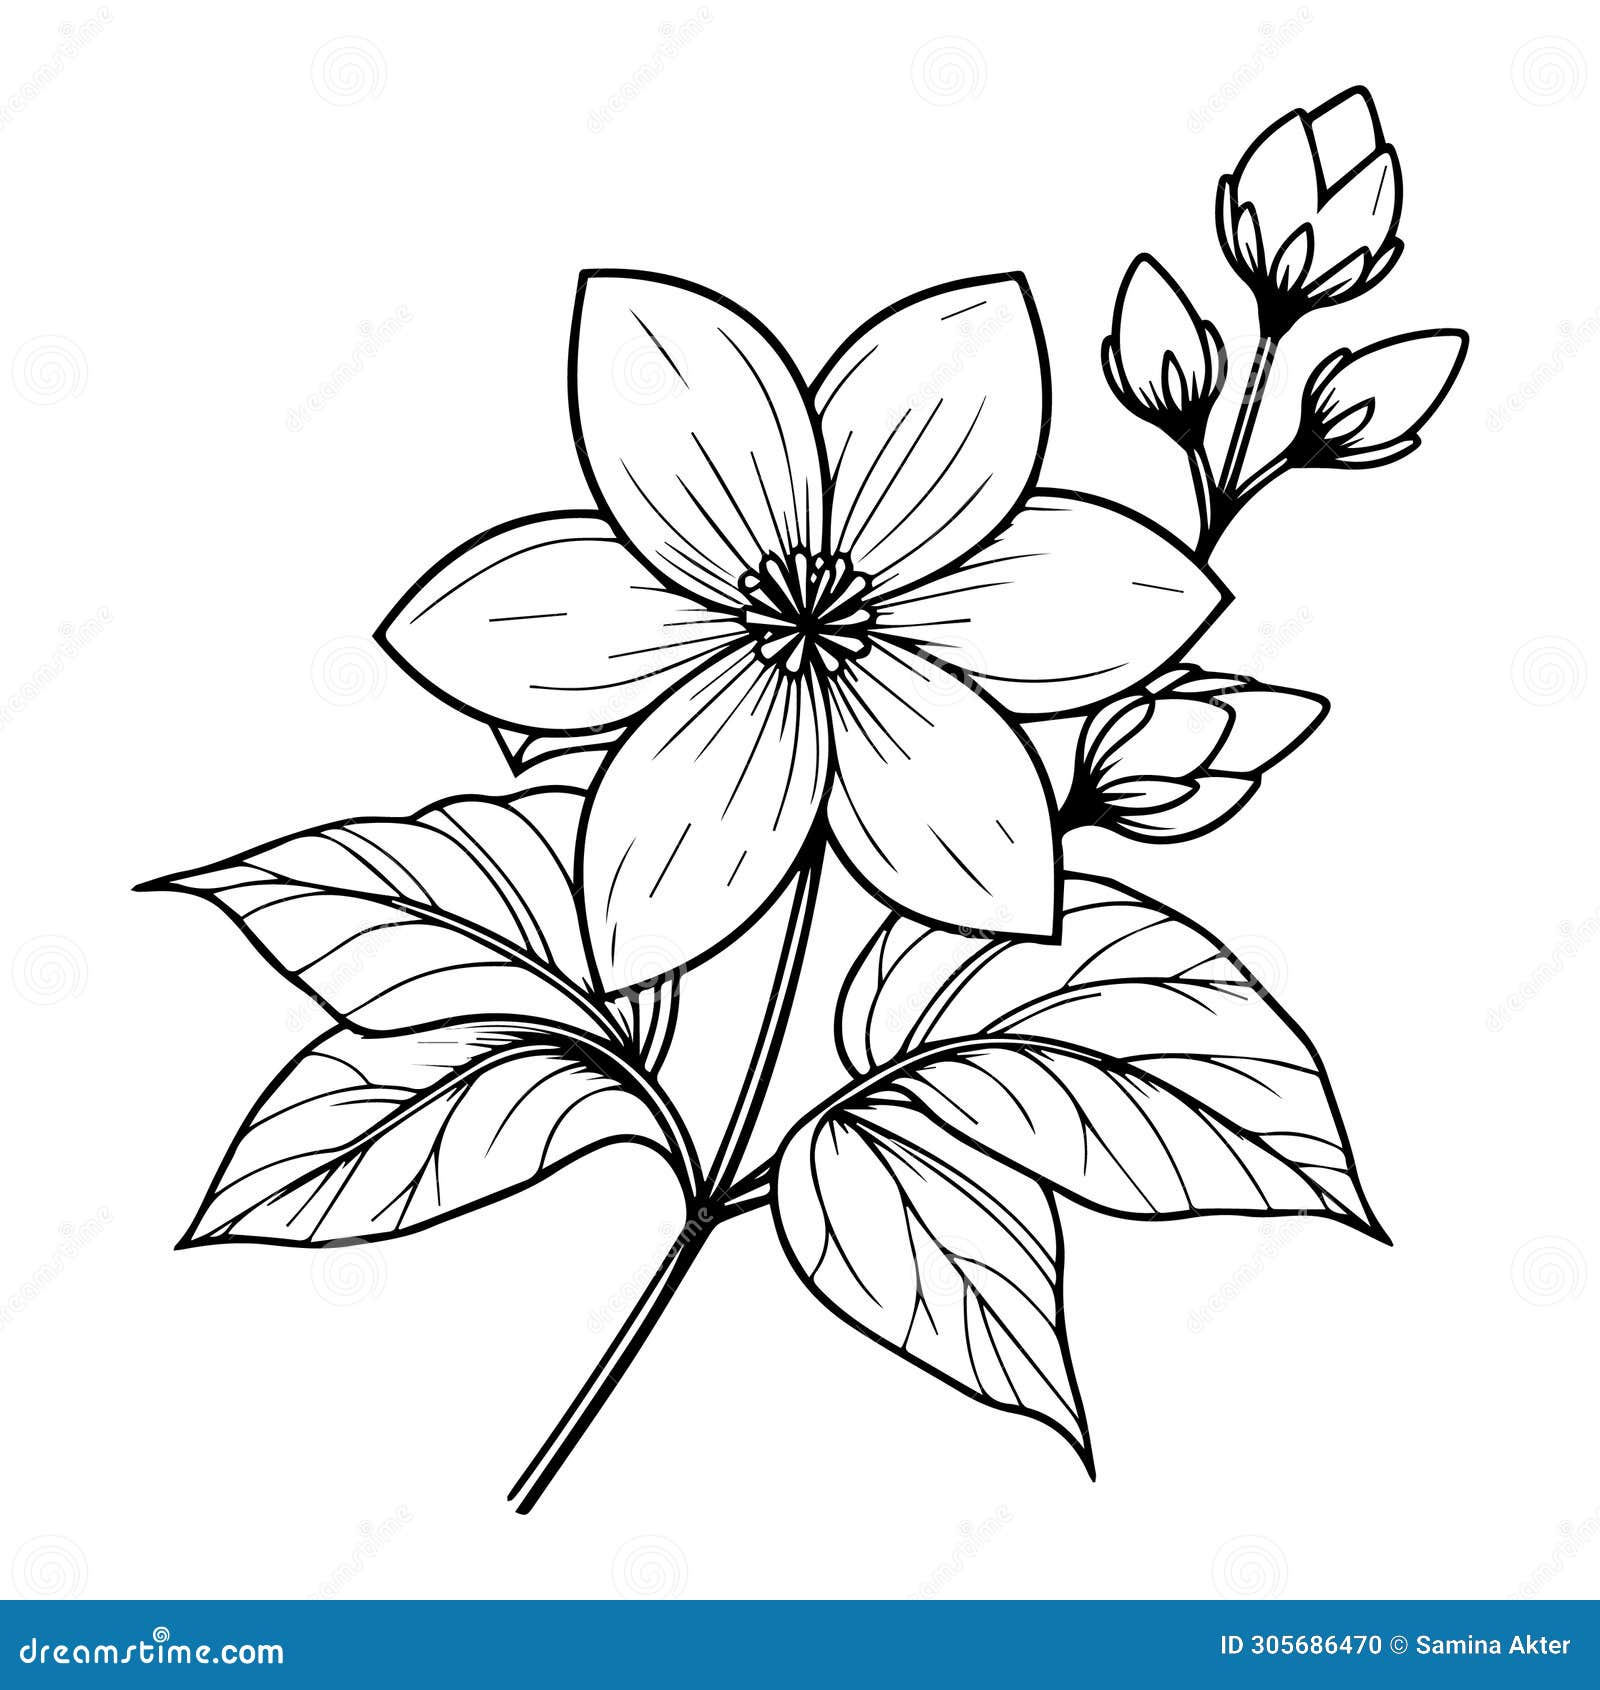 Jasmine Drawing Set - Hand Drawn White Flower With Green Leaves, In A  Branch Or As Small Separate Buds - Isolated Floral Design Vector  Illustration On White Background Royalty Free SVG, Cliparts,